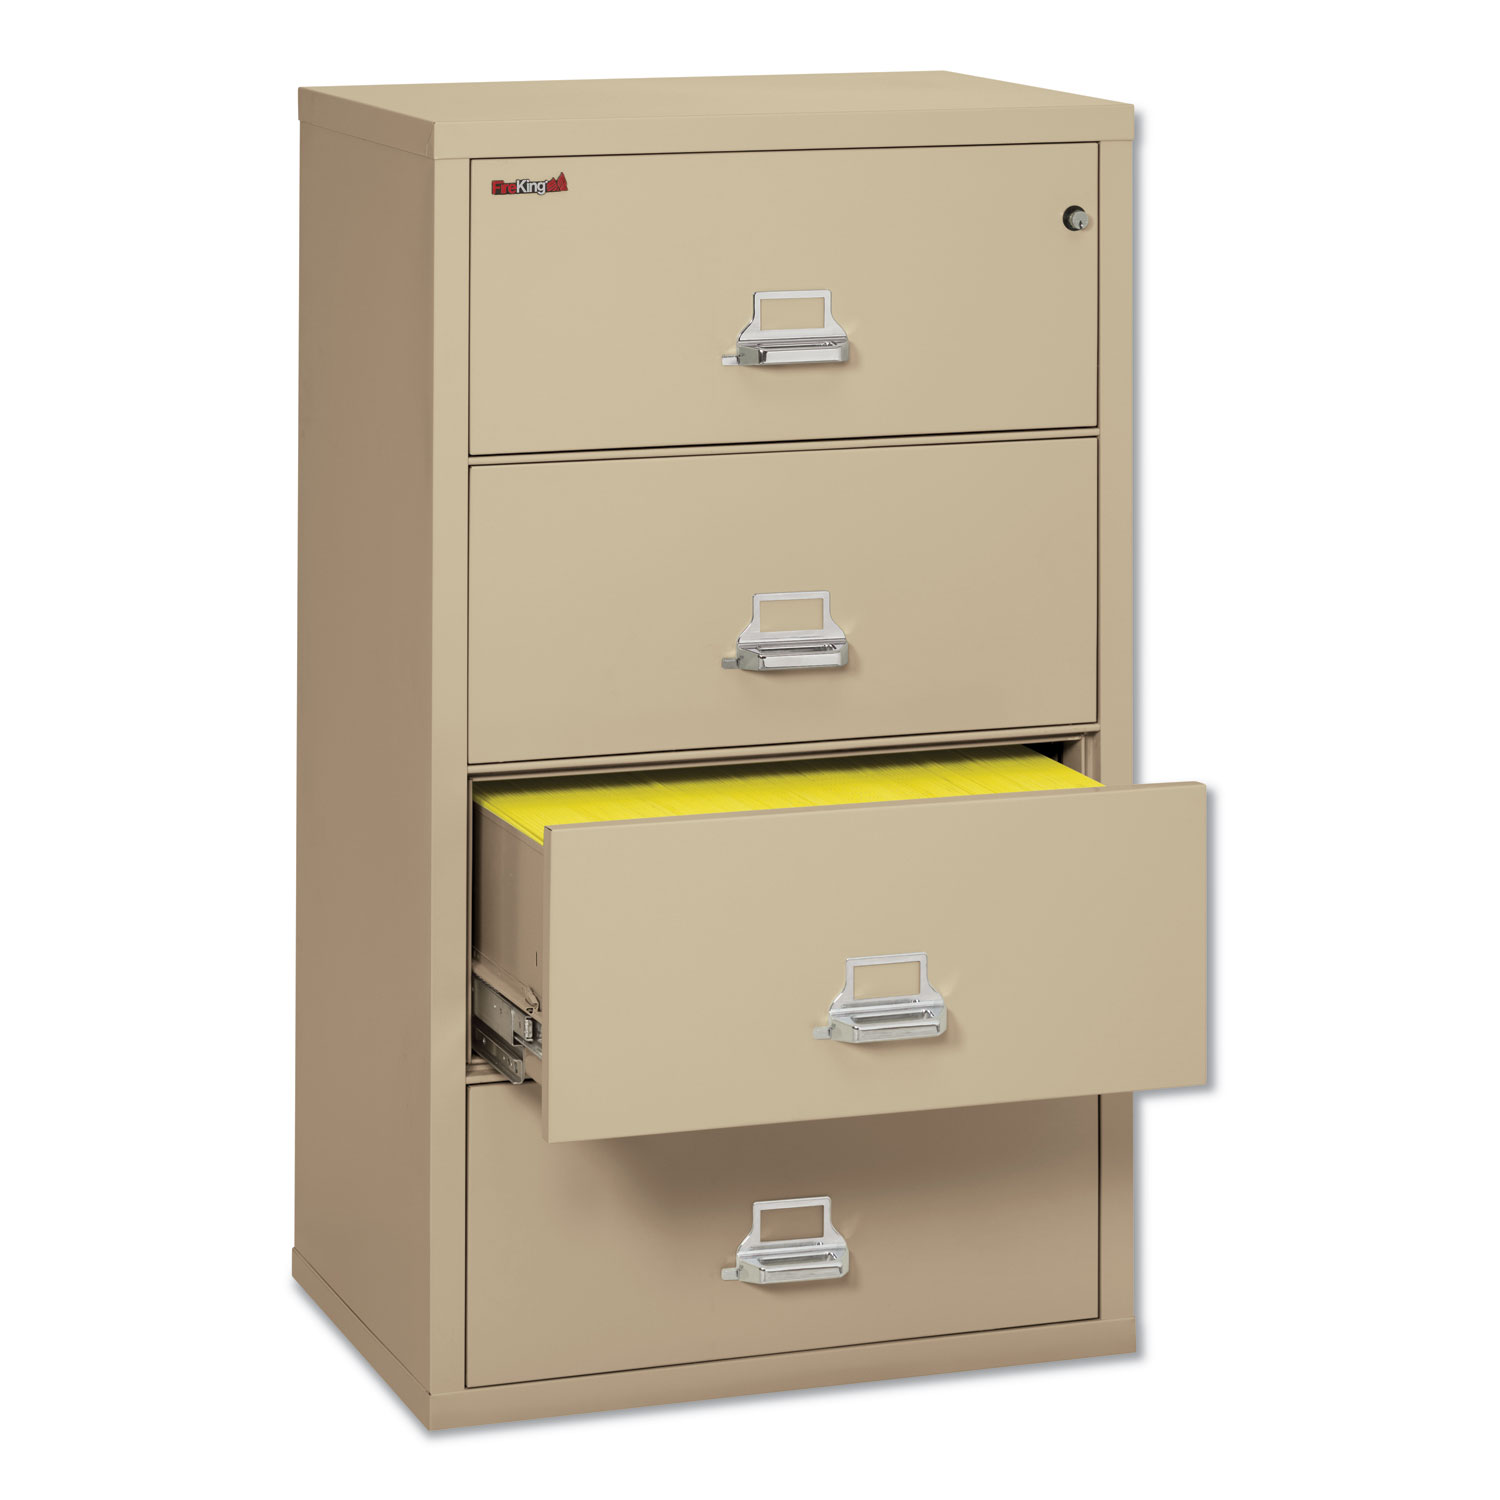  FireKing 4-3122-CPA Four-Drawer Lateral File, 31.13w x 22.13d x 52.75h, UL Listed 350°, Letter/Legal, Parchment (FIR43122CPA) 